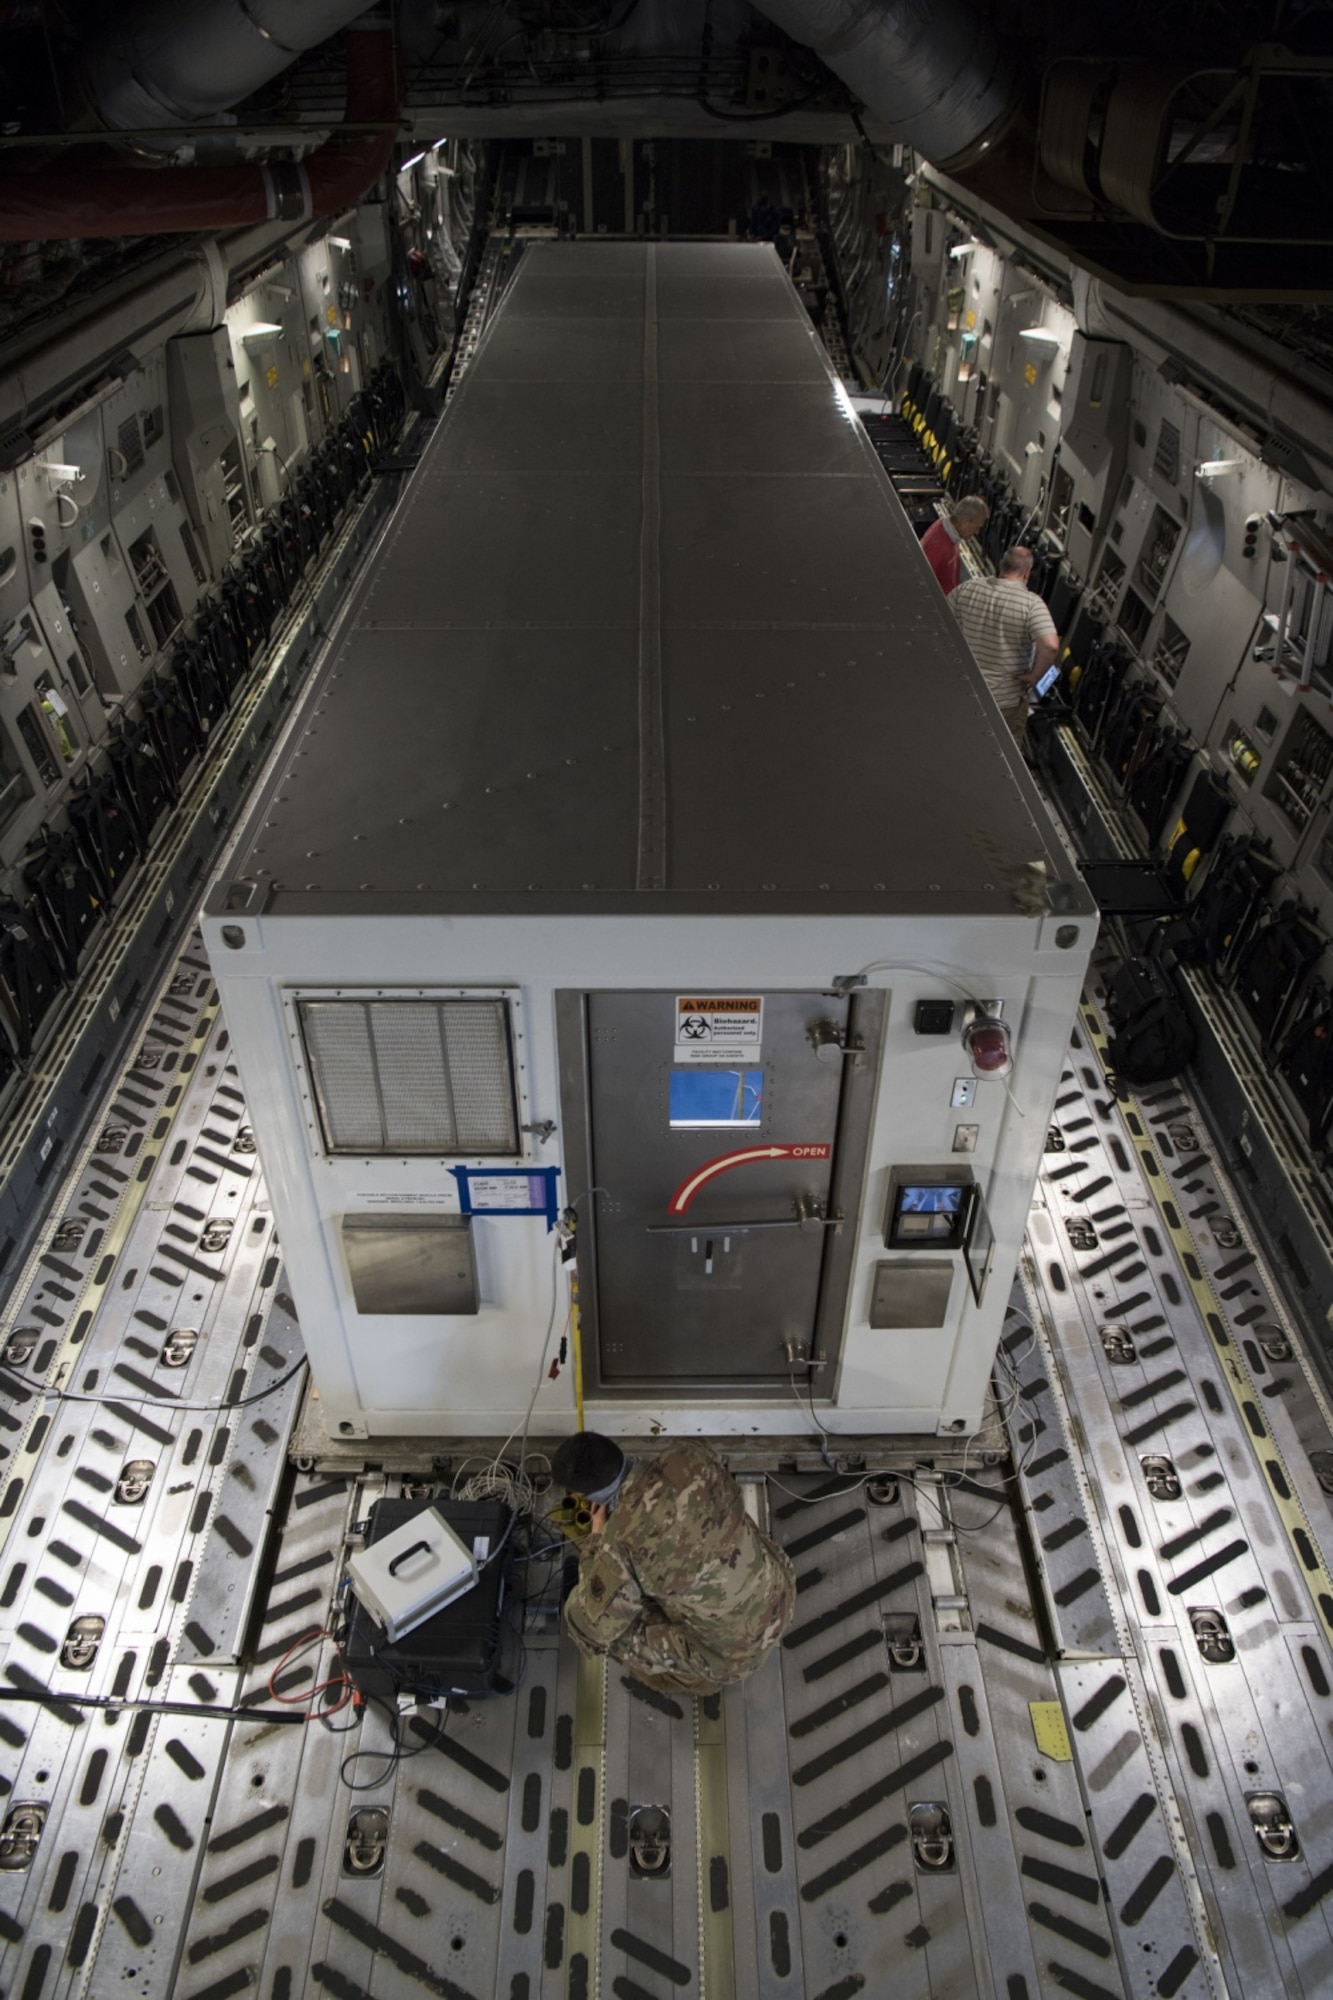 Operational testers from across the Department of Defense to test the Portable Bio-Containment Module on a C-17 Globemaster III at Joint-Base Charleston, S.C.